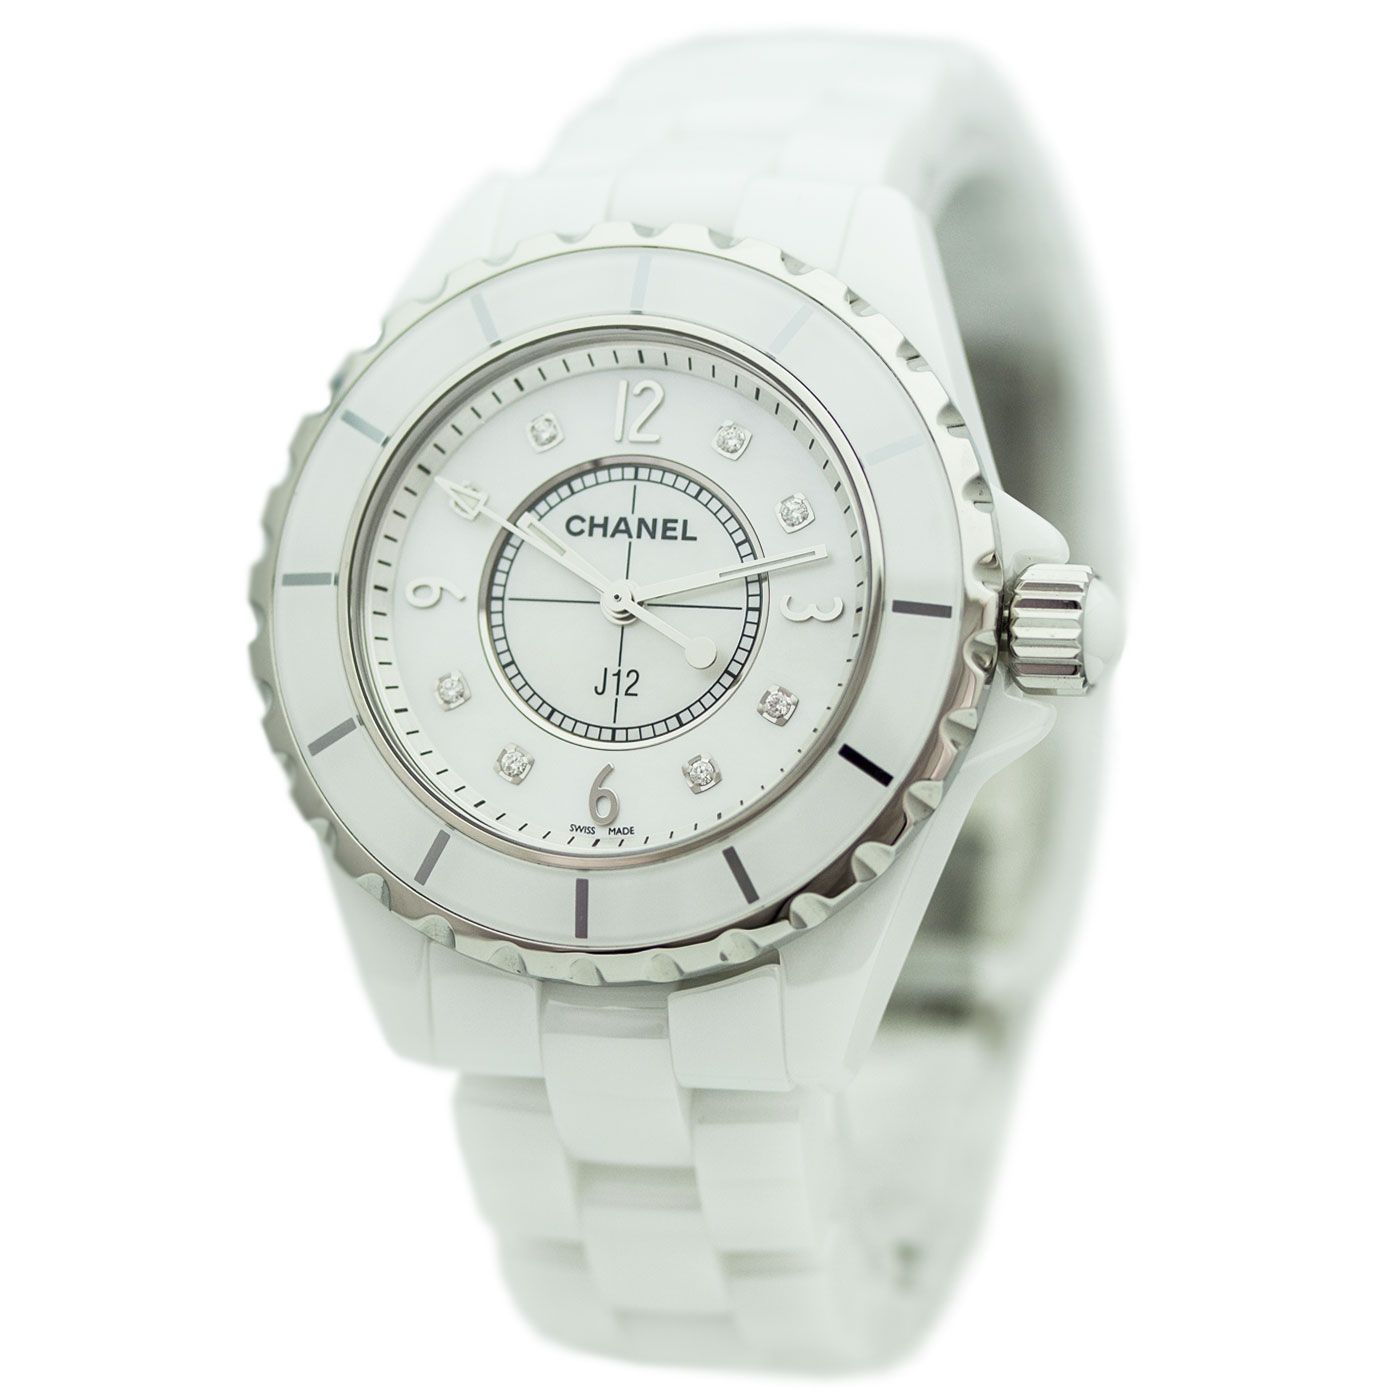 Chanel J12 33MM H1625 for $2,854 for sale from a Seller on Chrono24